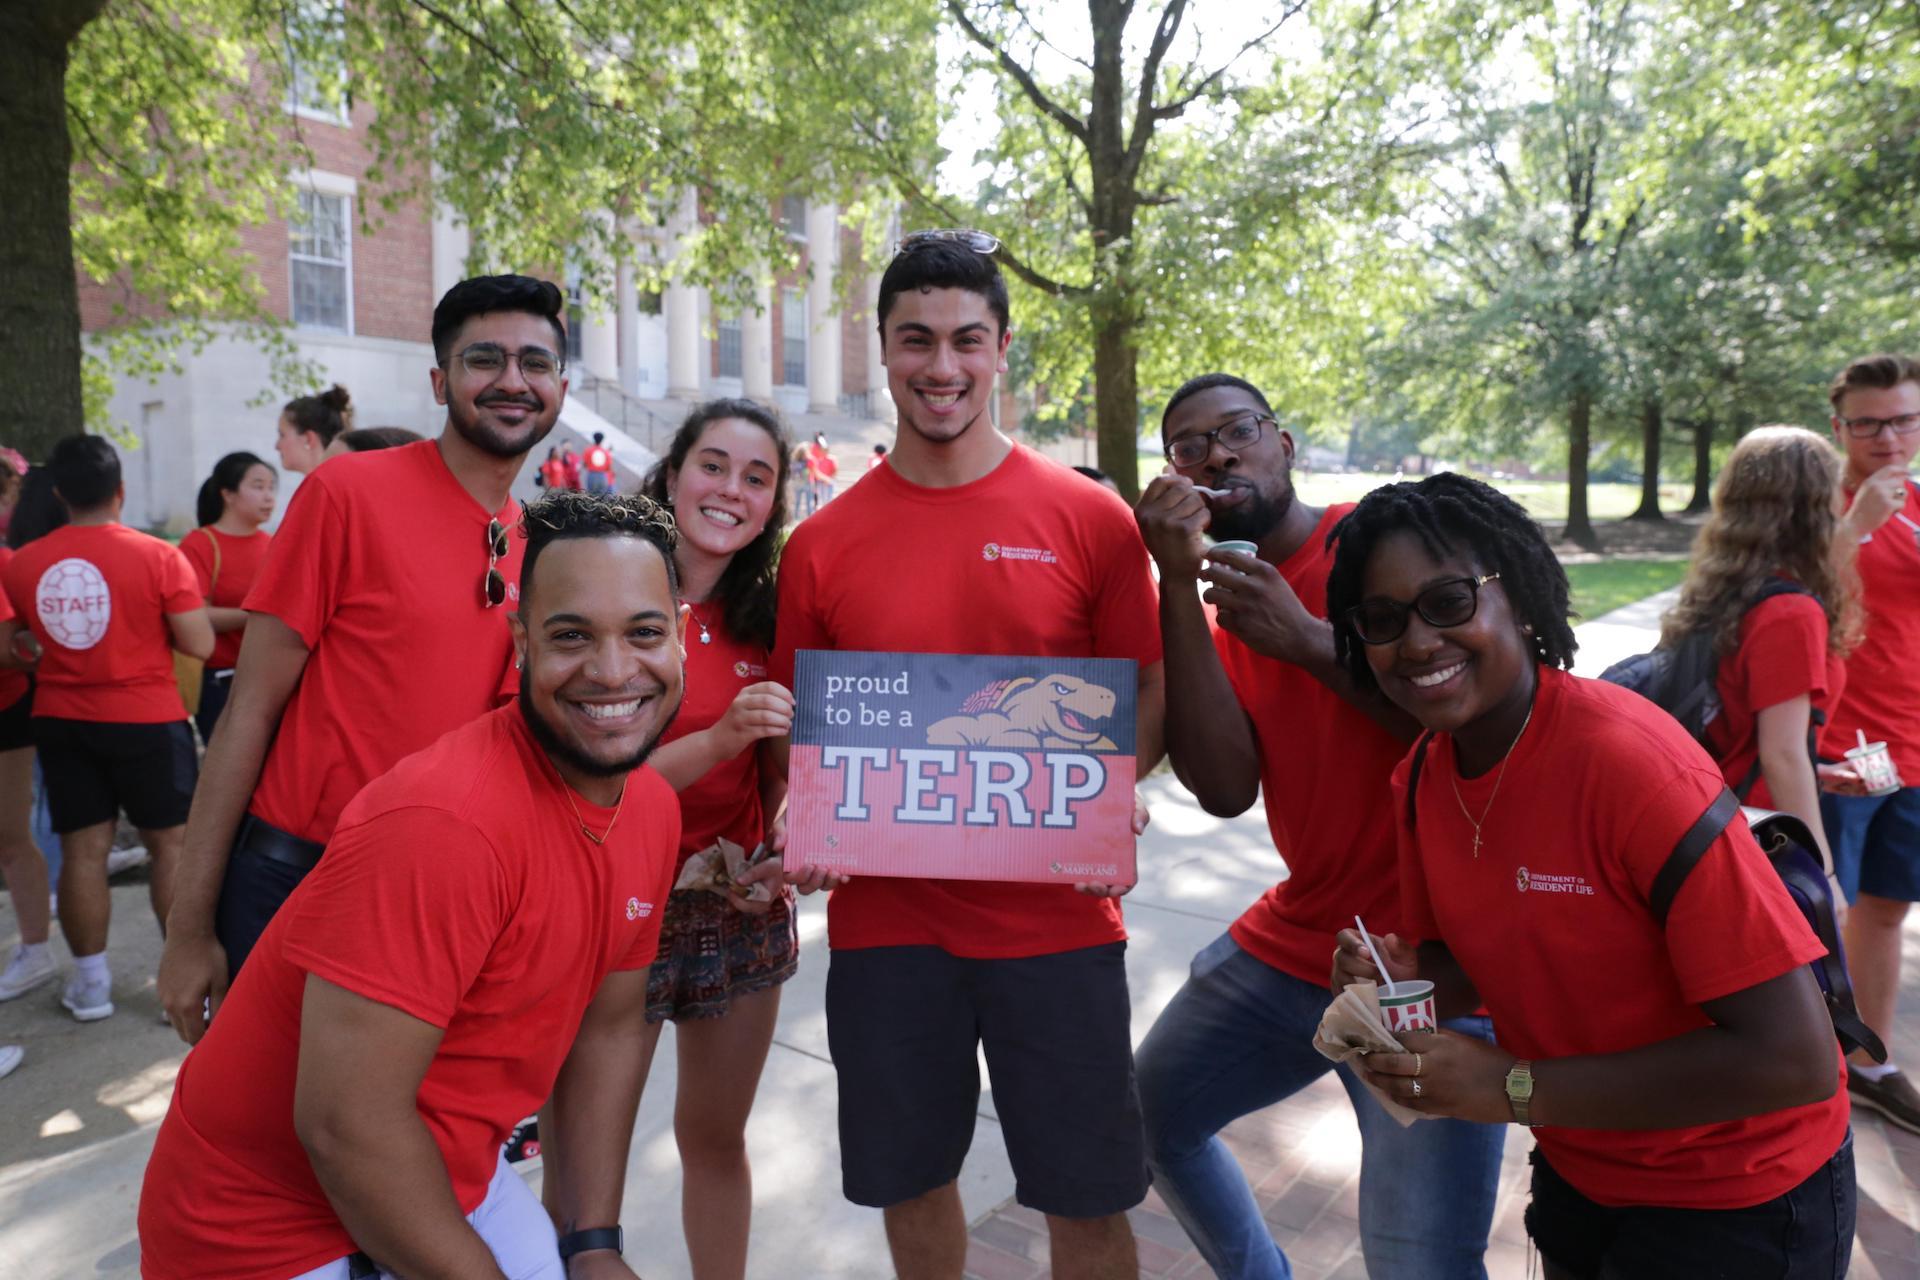 group of resident assistants wearing red shirts and holding up a proud terp sign